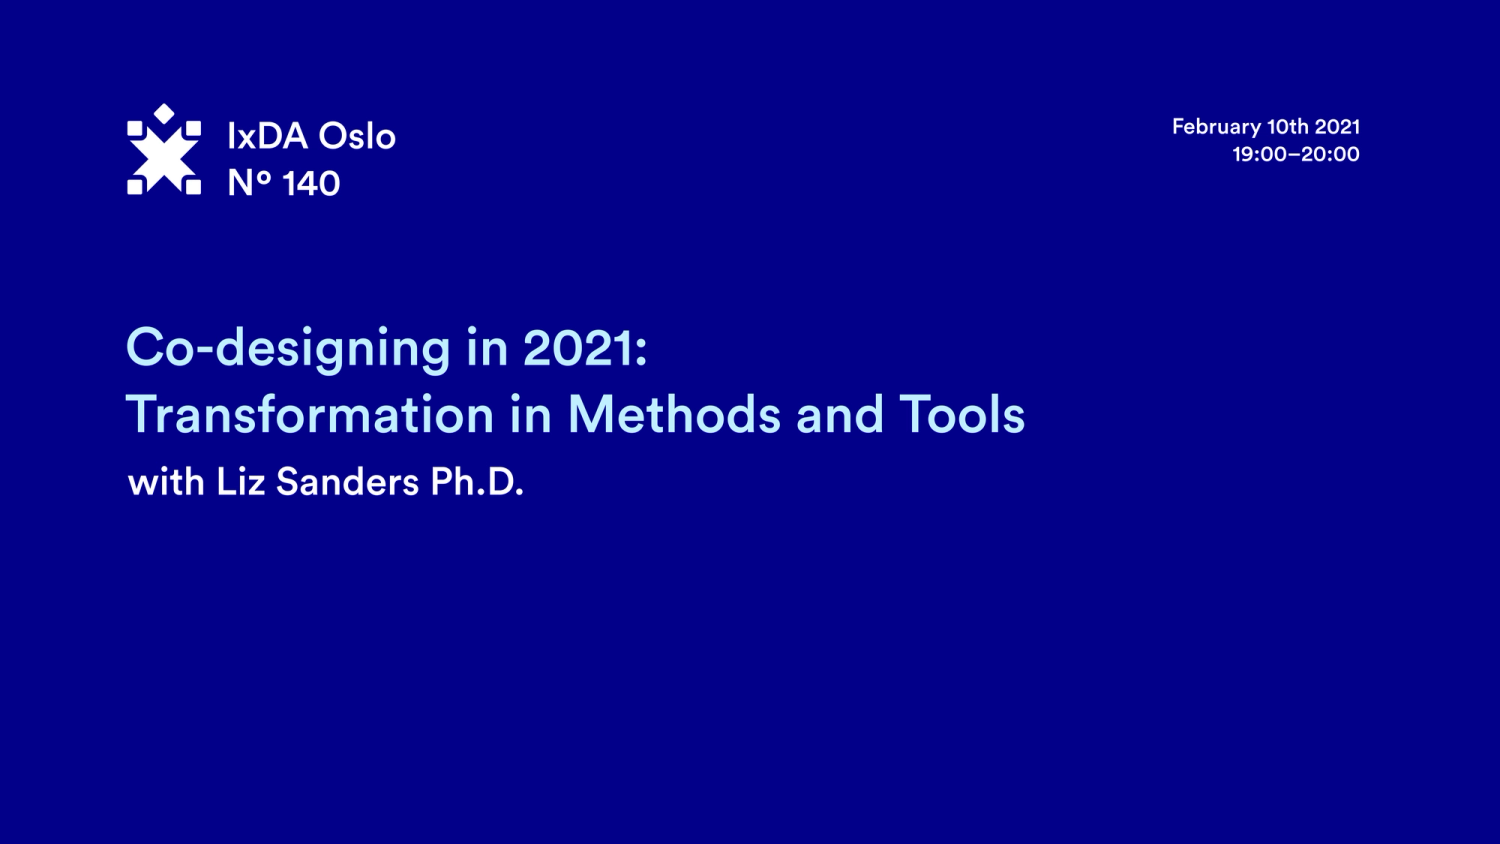 Co-designing in 2021 – Transformation in Methods and Tools. A talk by Liz Sanders, Ph.D. presented by IxDA Oslo